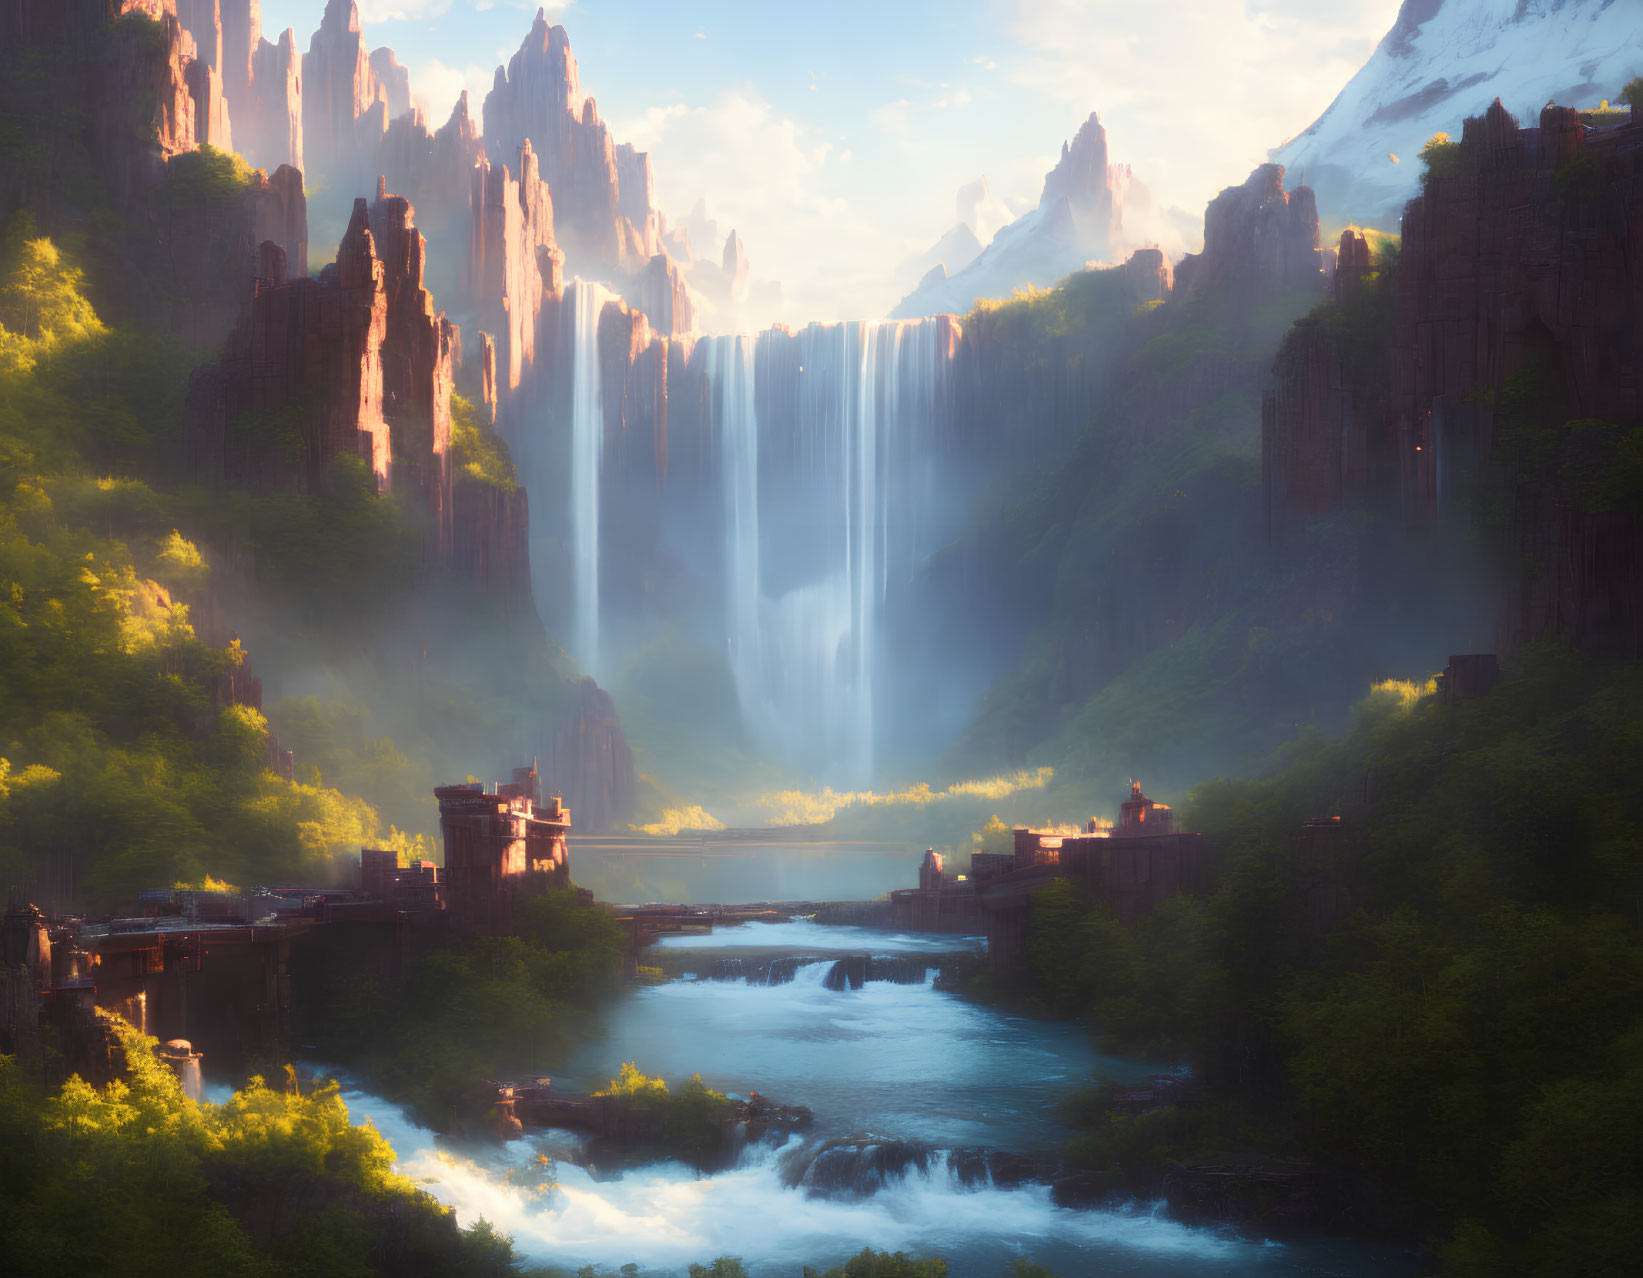 Sunlit cliffs and majestic waterfall in ancient castle landscape